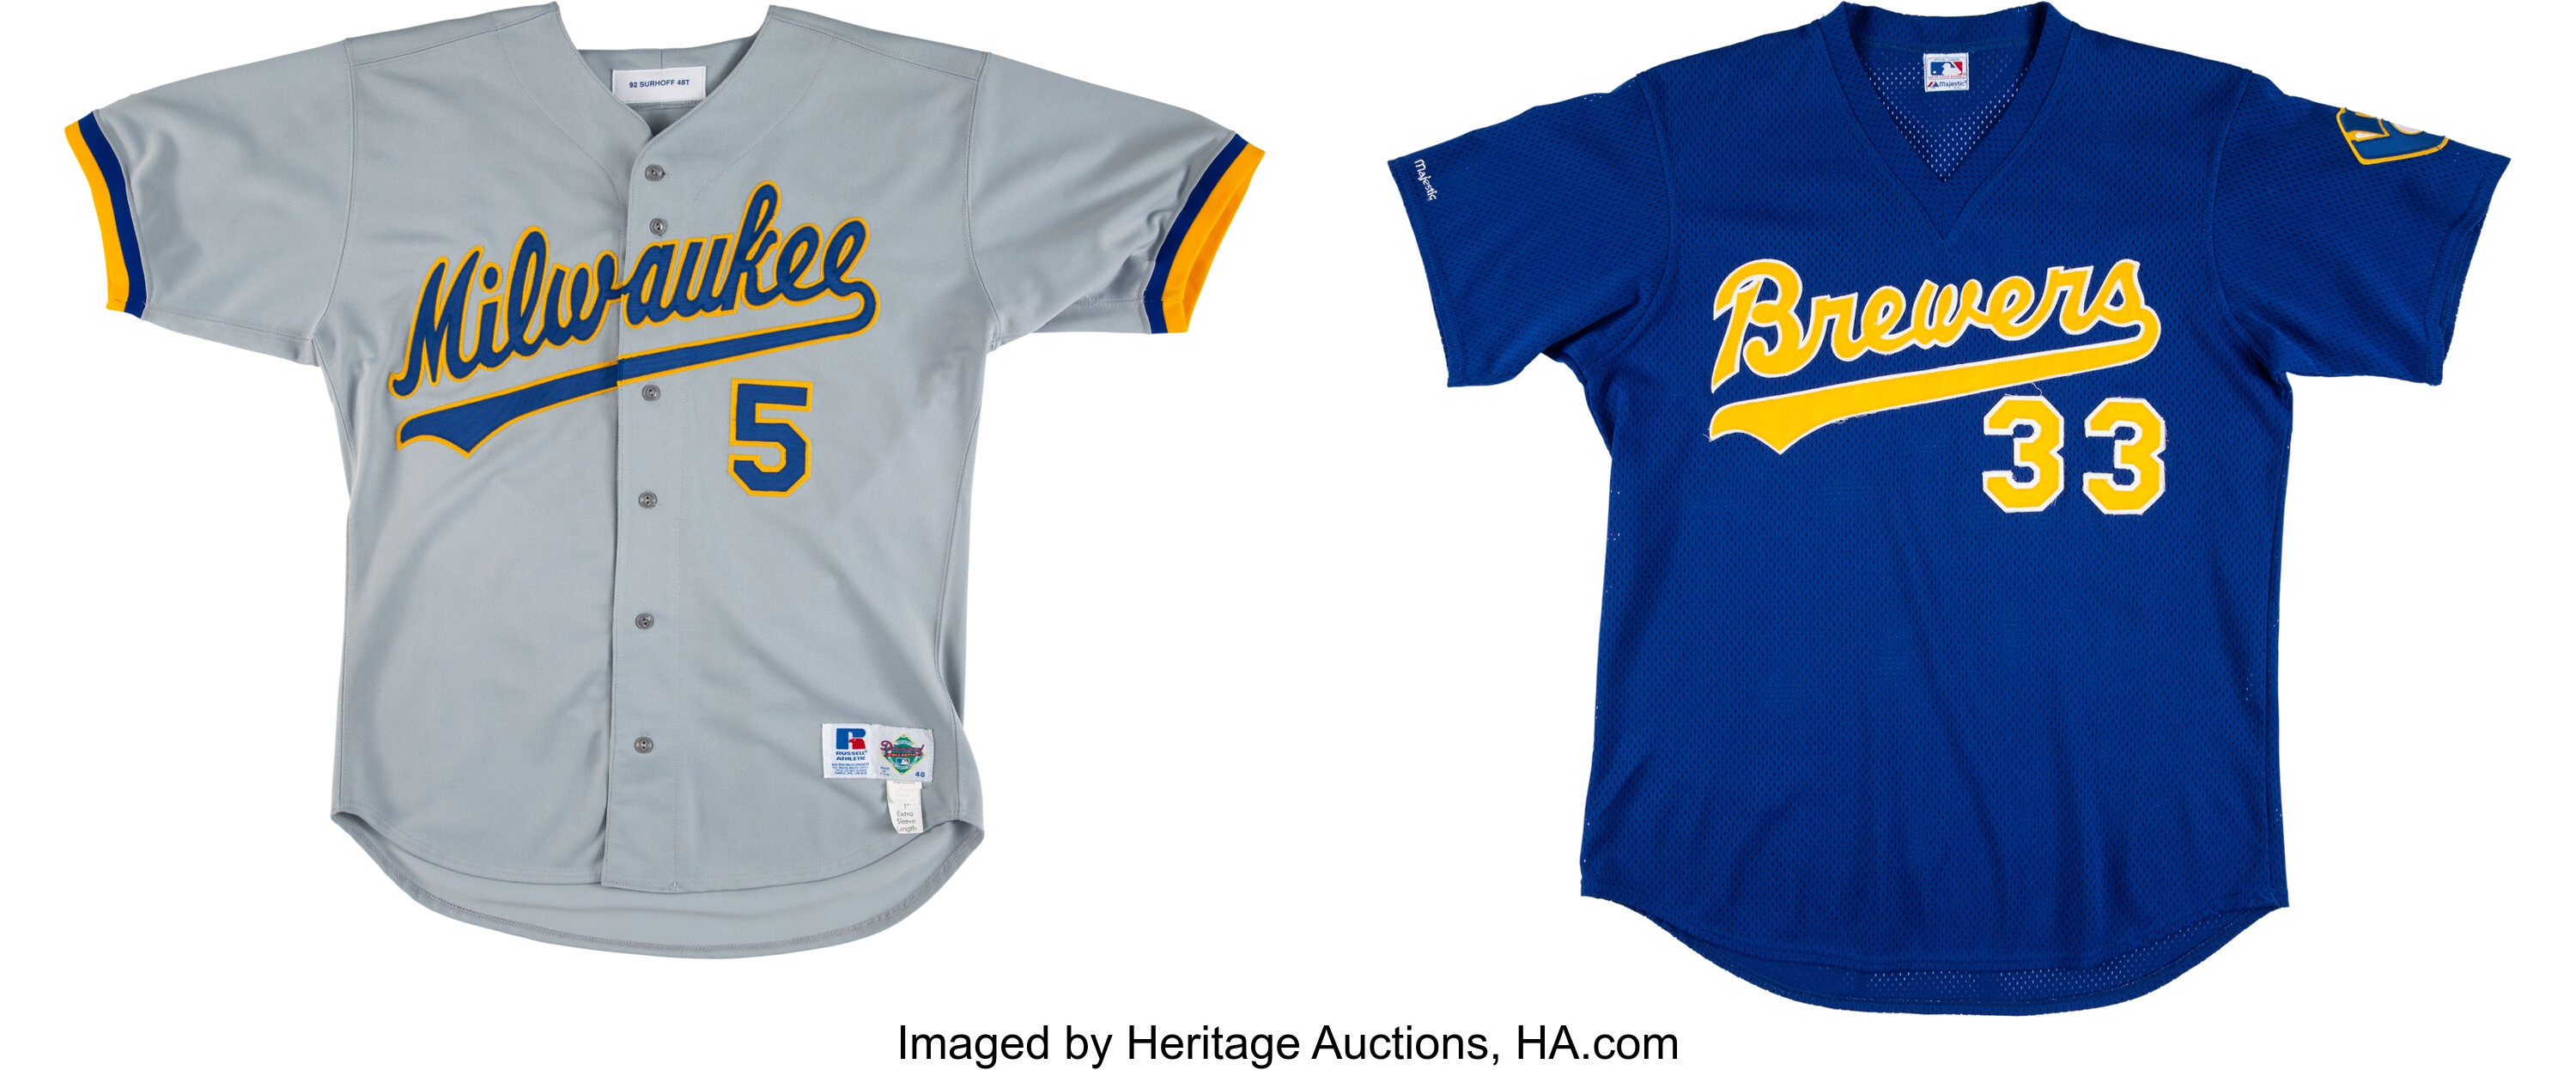 Game-Worn “Cerveceros” Jerseys to be Auctioned Off at brewers.com